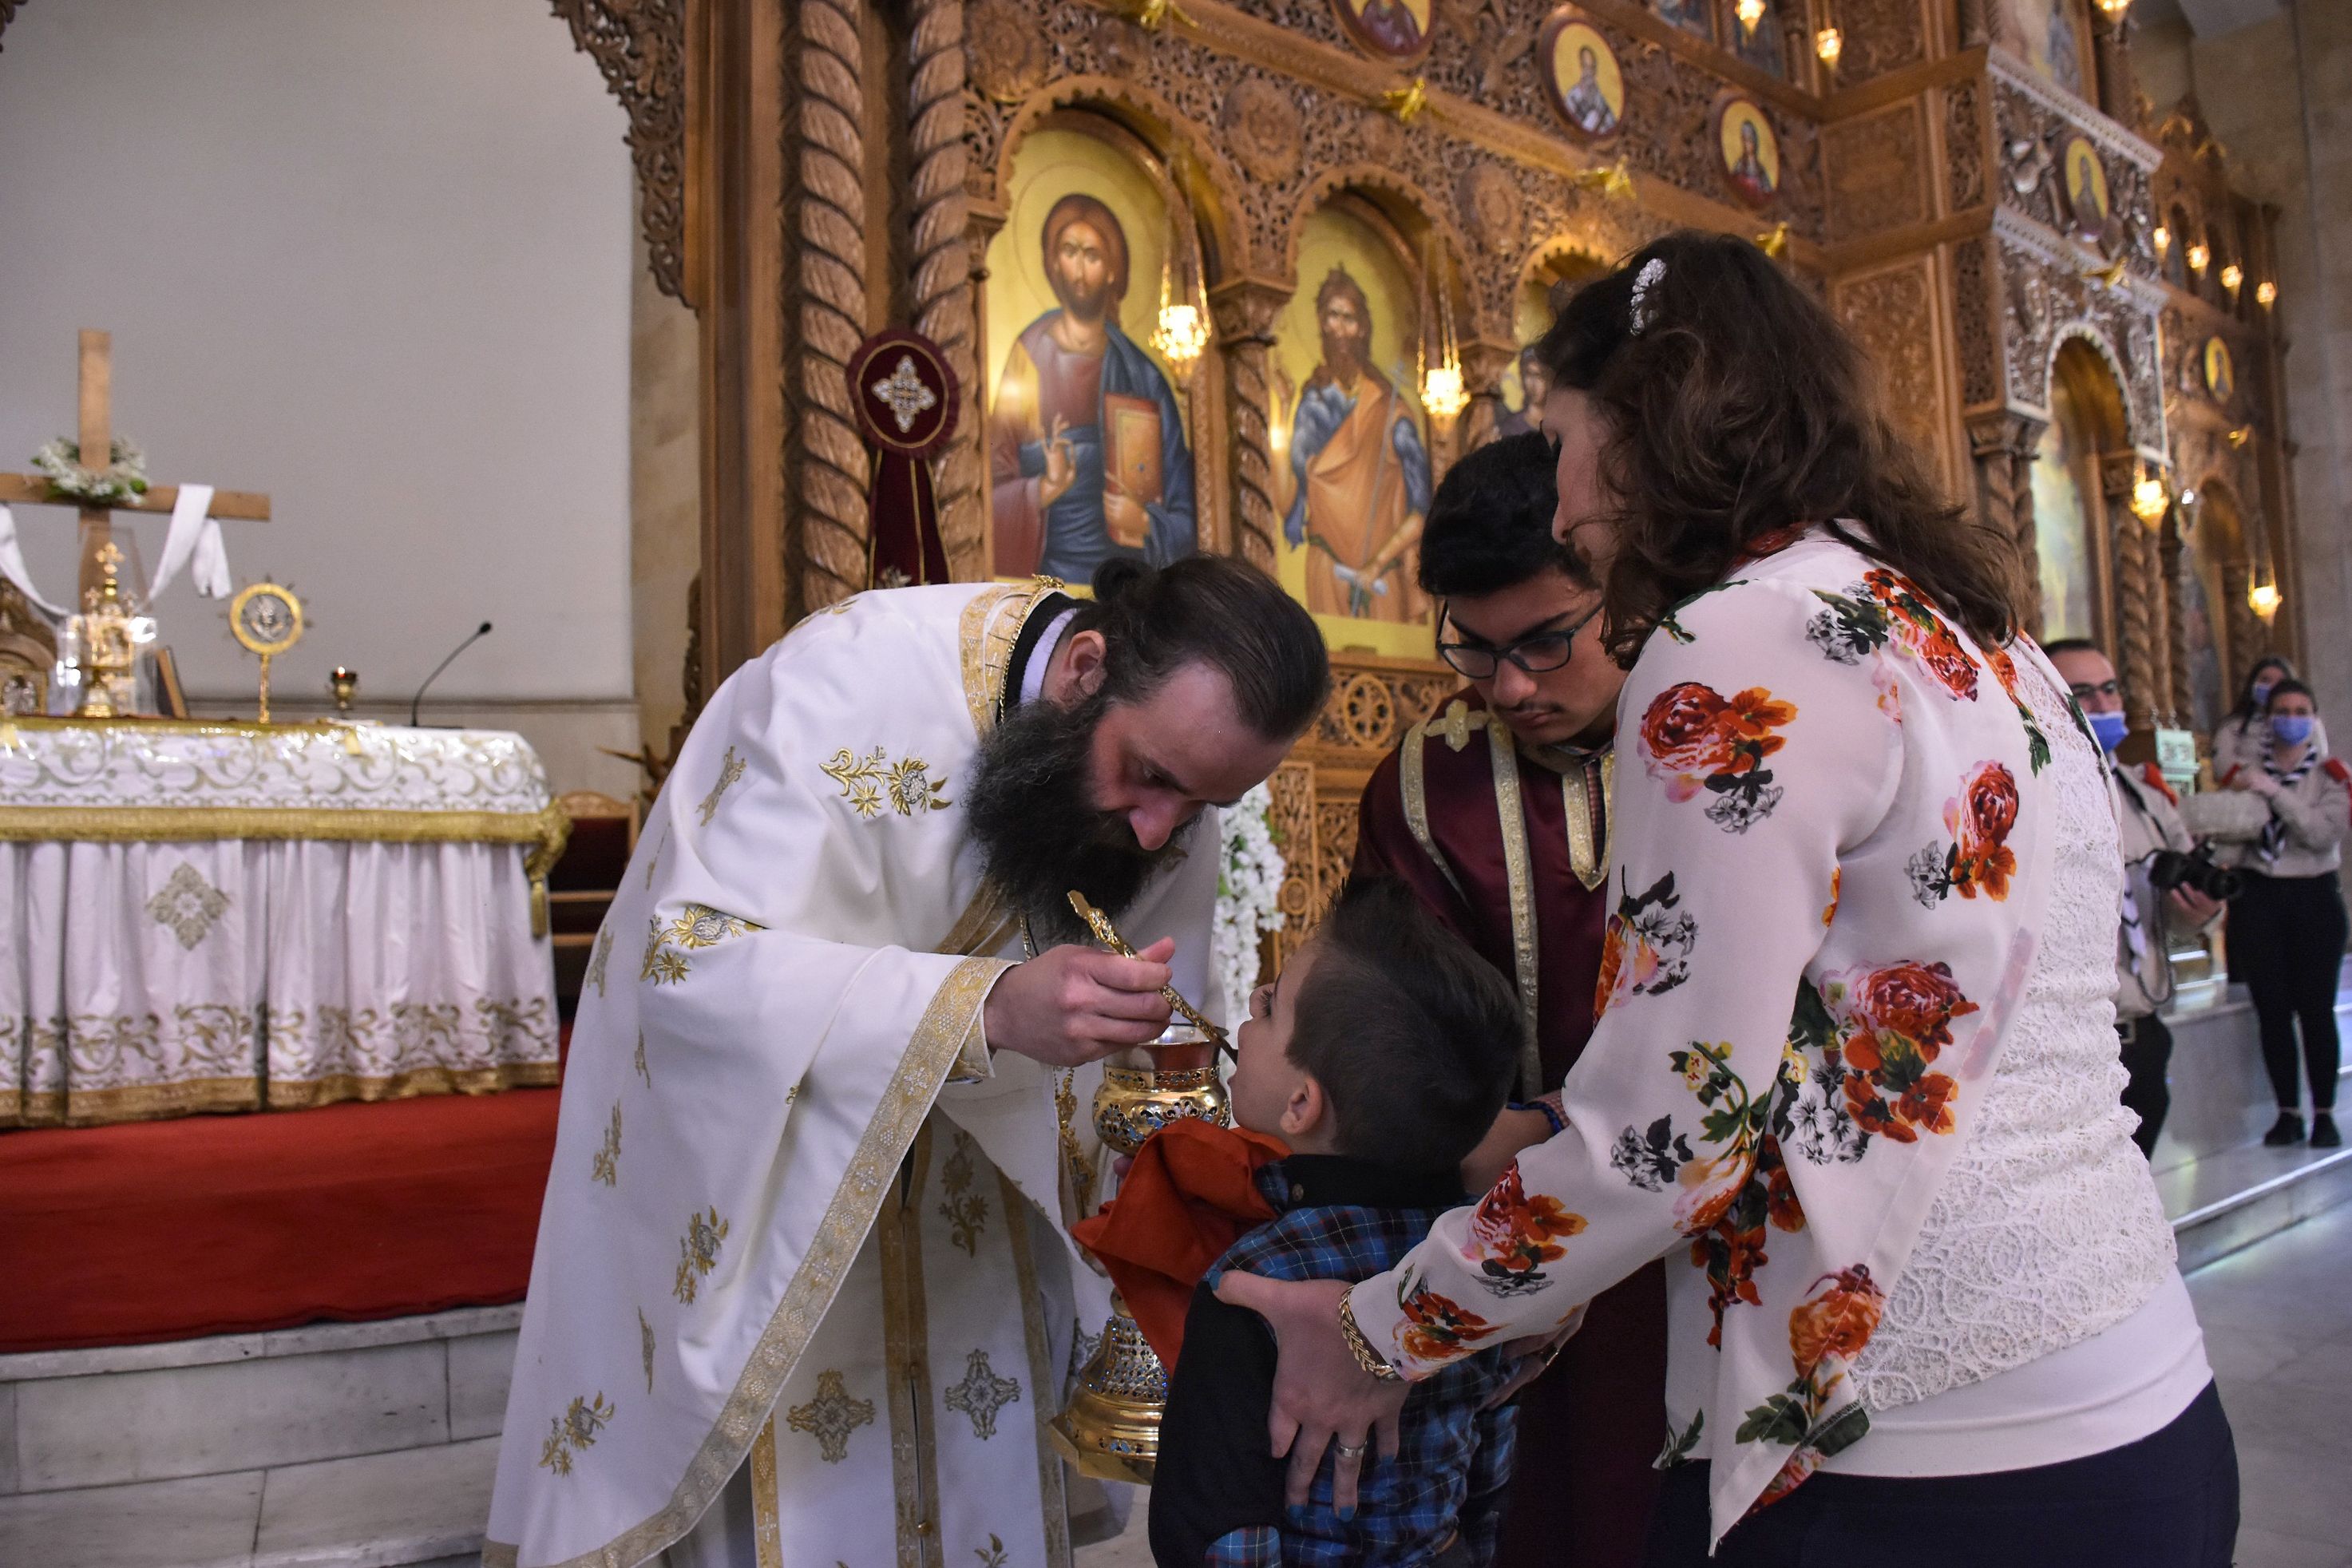 A child takes the communion from a Roman Orthodox priest following the Sunday mass at the Saint Elias church in the nothern Syrian city of Aleppo, on May 10, 2020. (Photo by -/AFP via Getty Images)